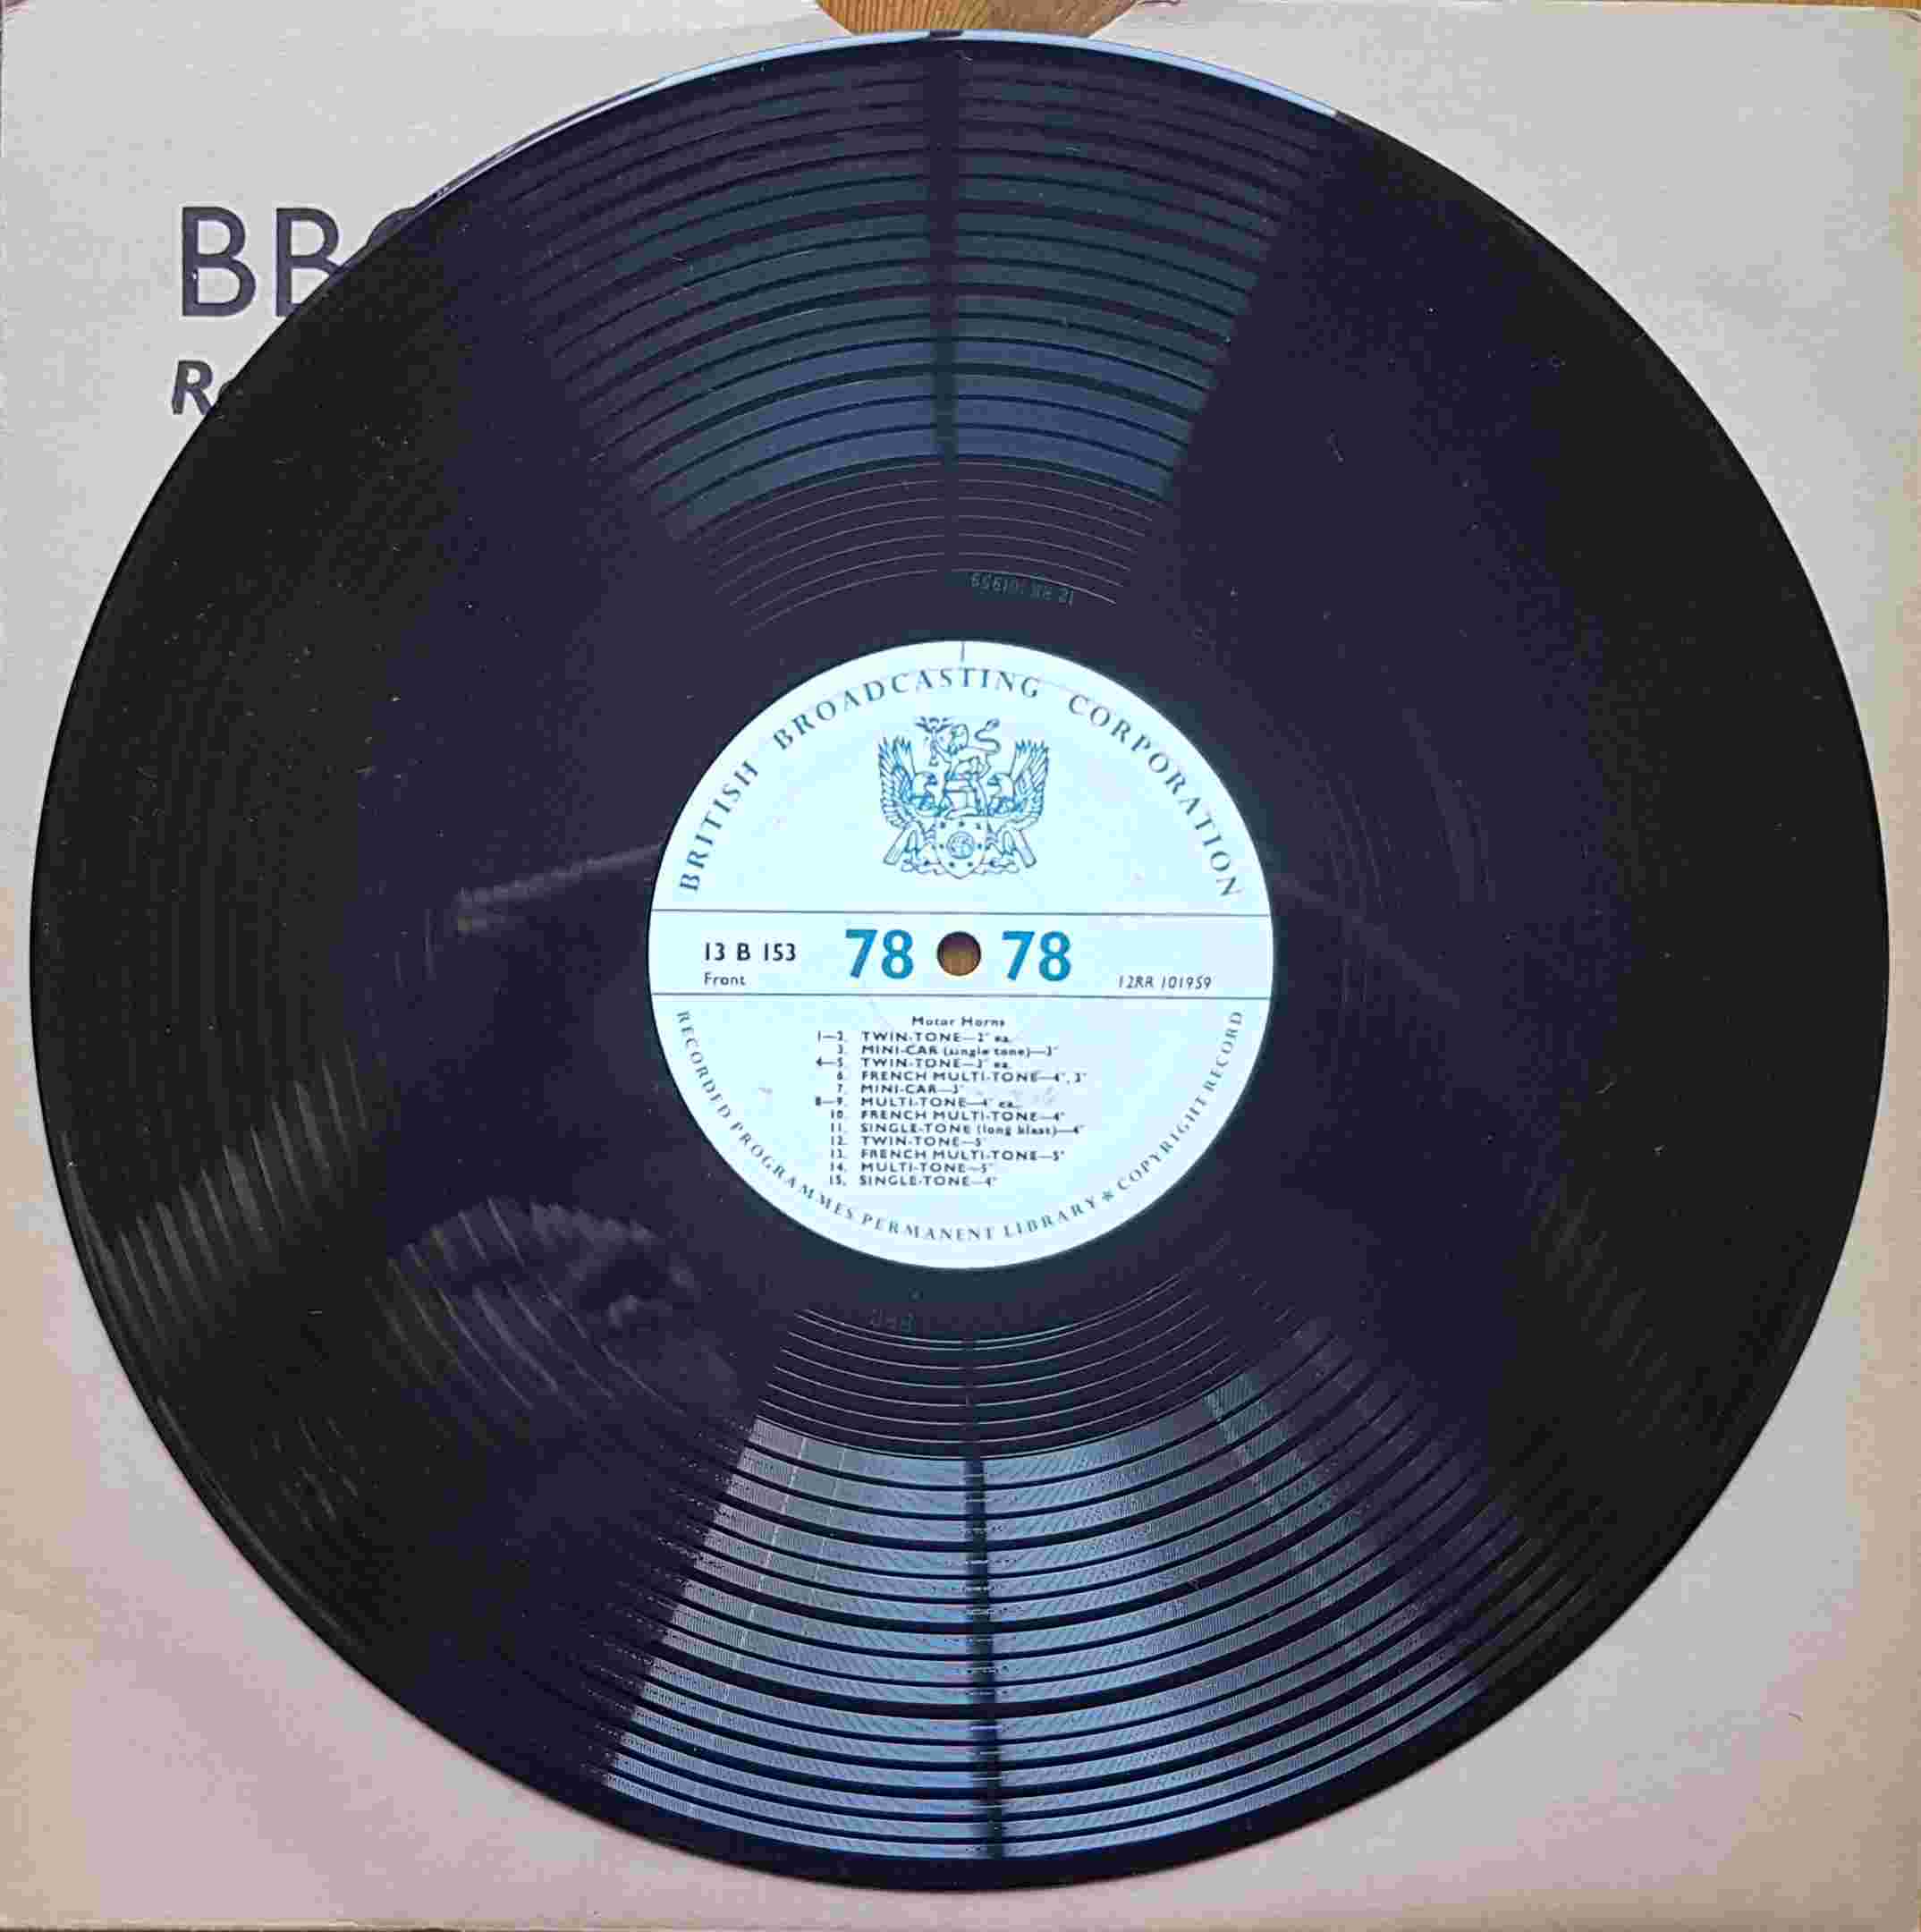 Picture of 13 B 153 Motor horns by artist Not registered from the BBC 78 - Records and Tapes library